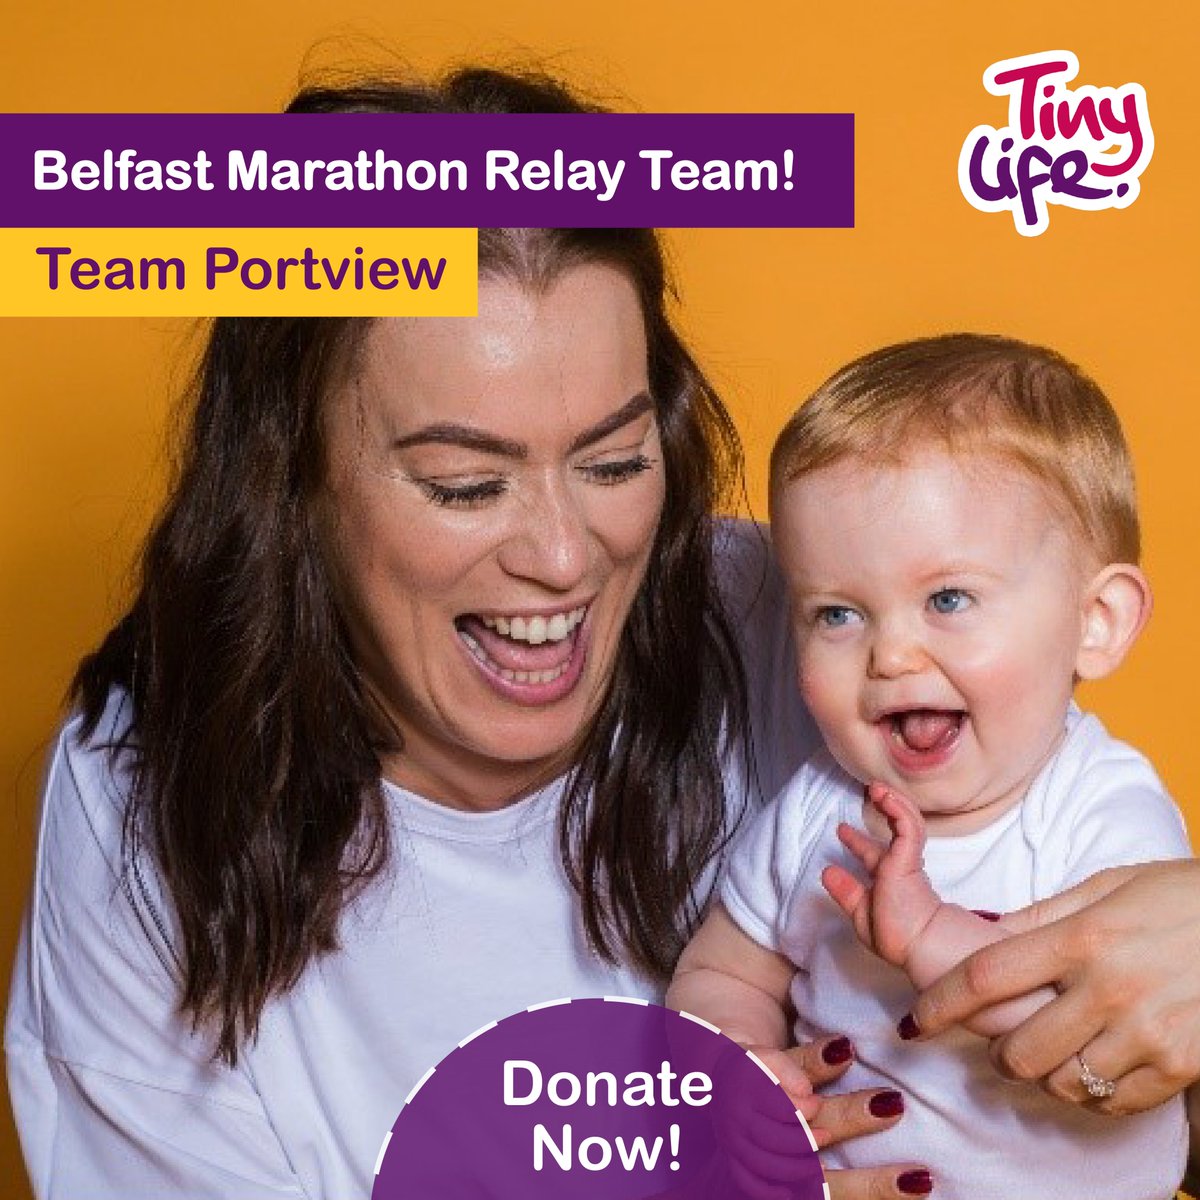 Exciting news! @PortviewFitOut is entering two relay teams in the Belfast City Marathon this year to support TinyLife. Join us in cheering on #TeamPortview as they run for a cause close to their hearts! 🏃‍♂️💨 Donate here: tinylife.enthuse.com/pf/team-portvi… #BelfastCityMarathon #TinyLife